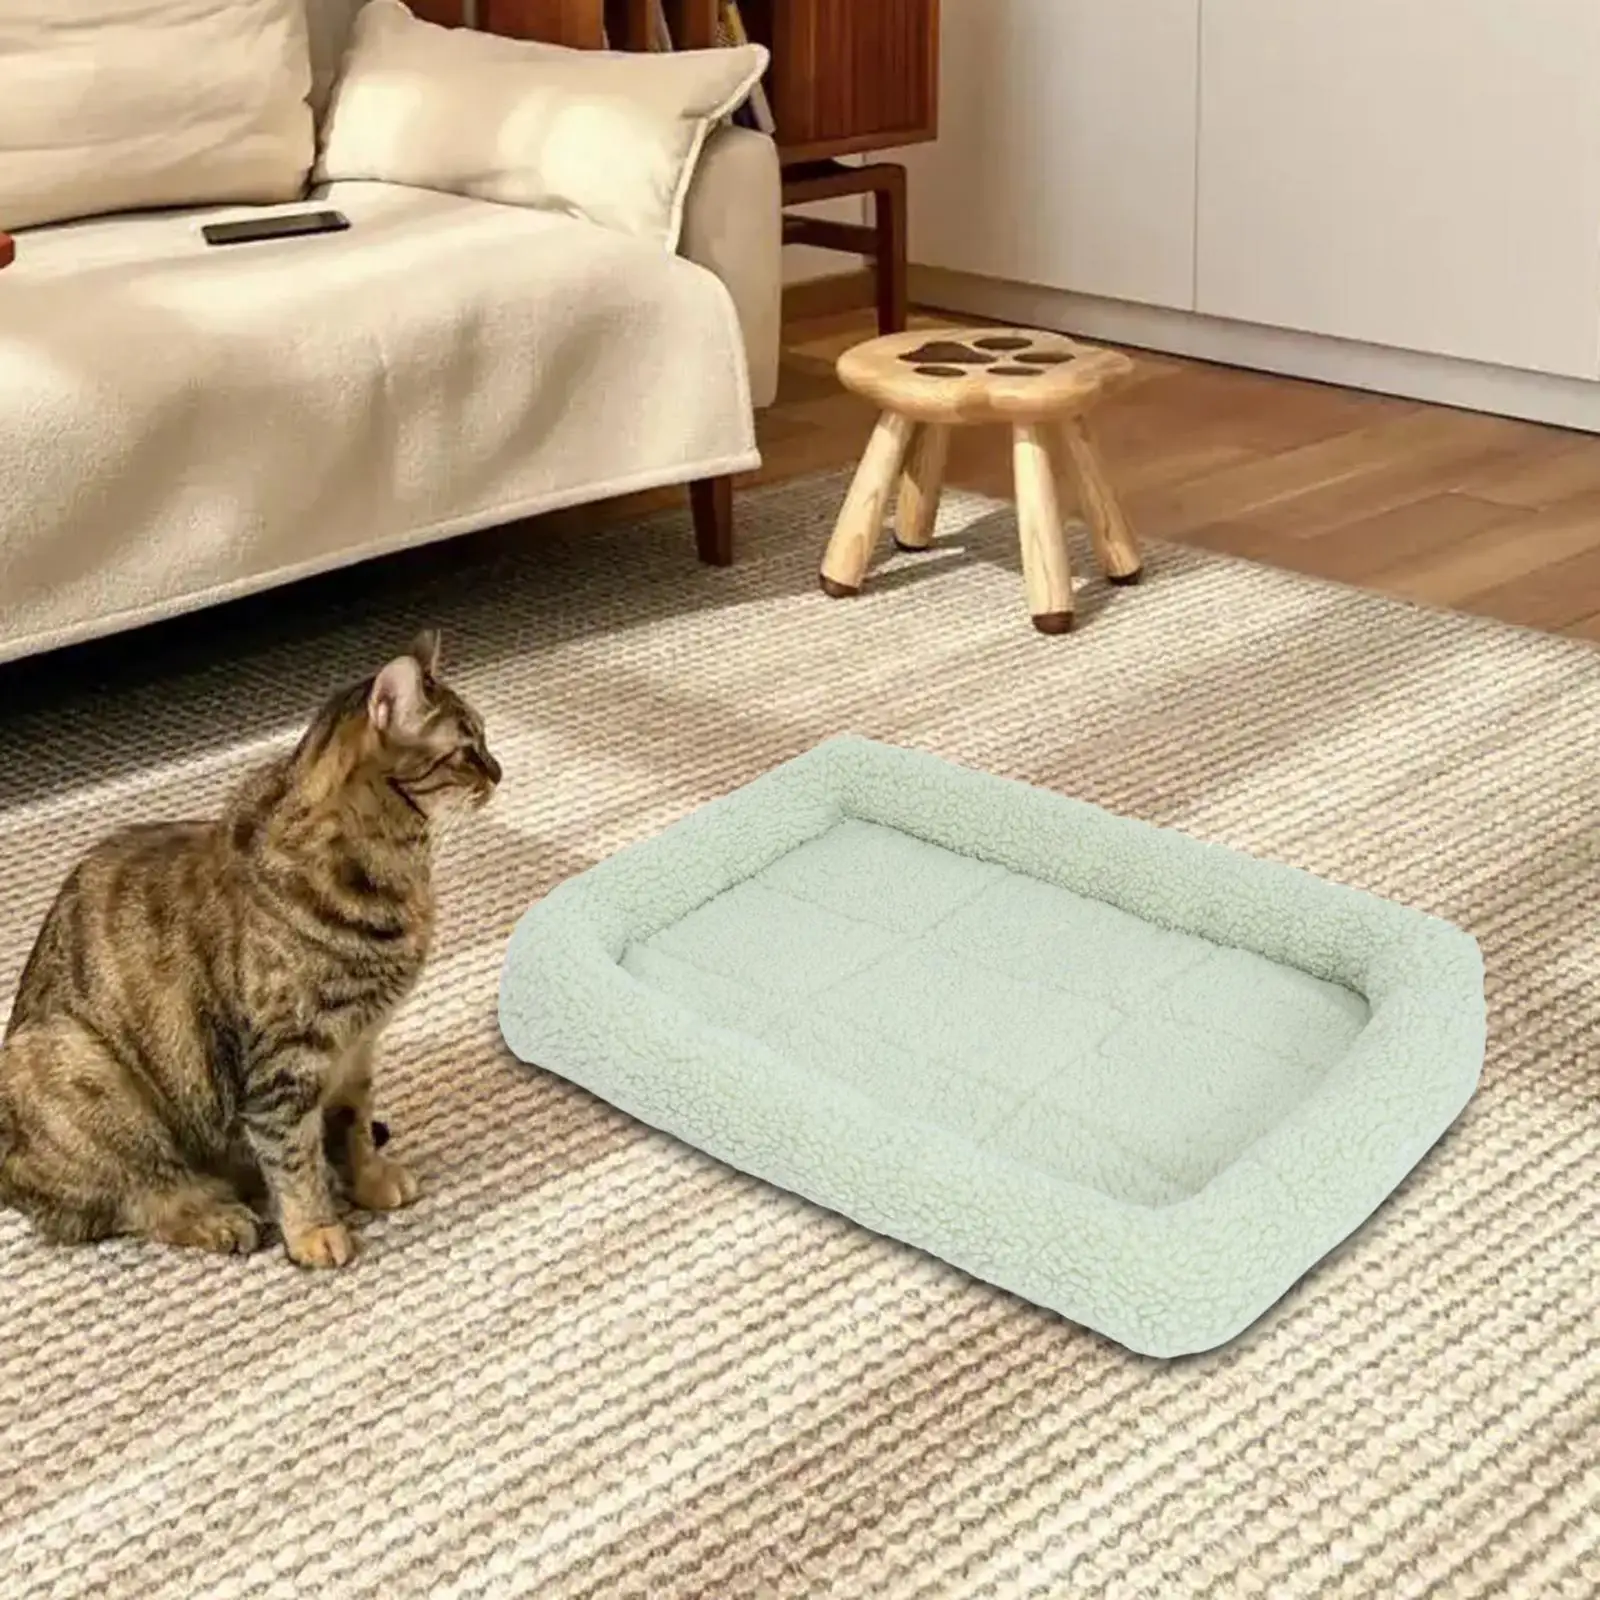 Cat Bed Cushion Cuddler Bed Self Warming Comfortable Nest Dog Bed Pet Pad for Small Medium Dogs Resting Playing Calming Kitten